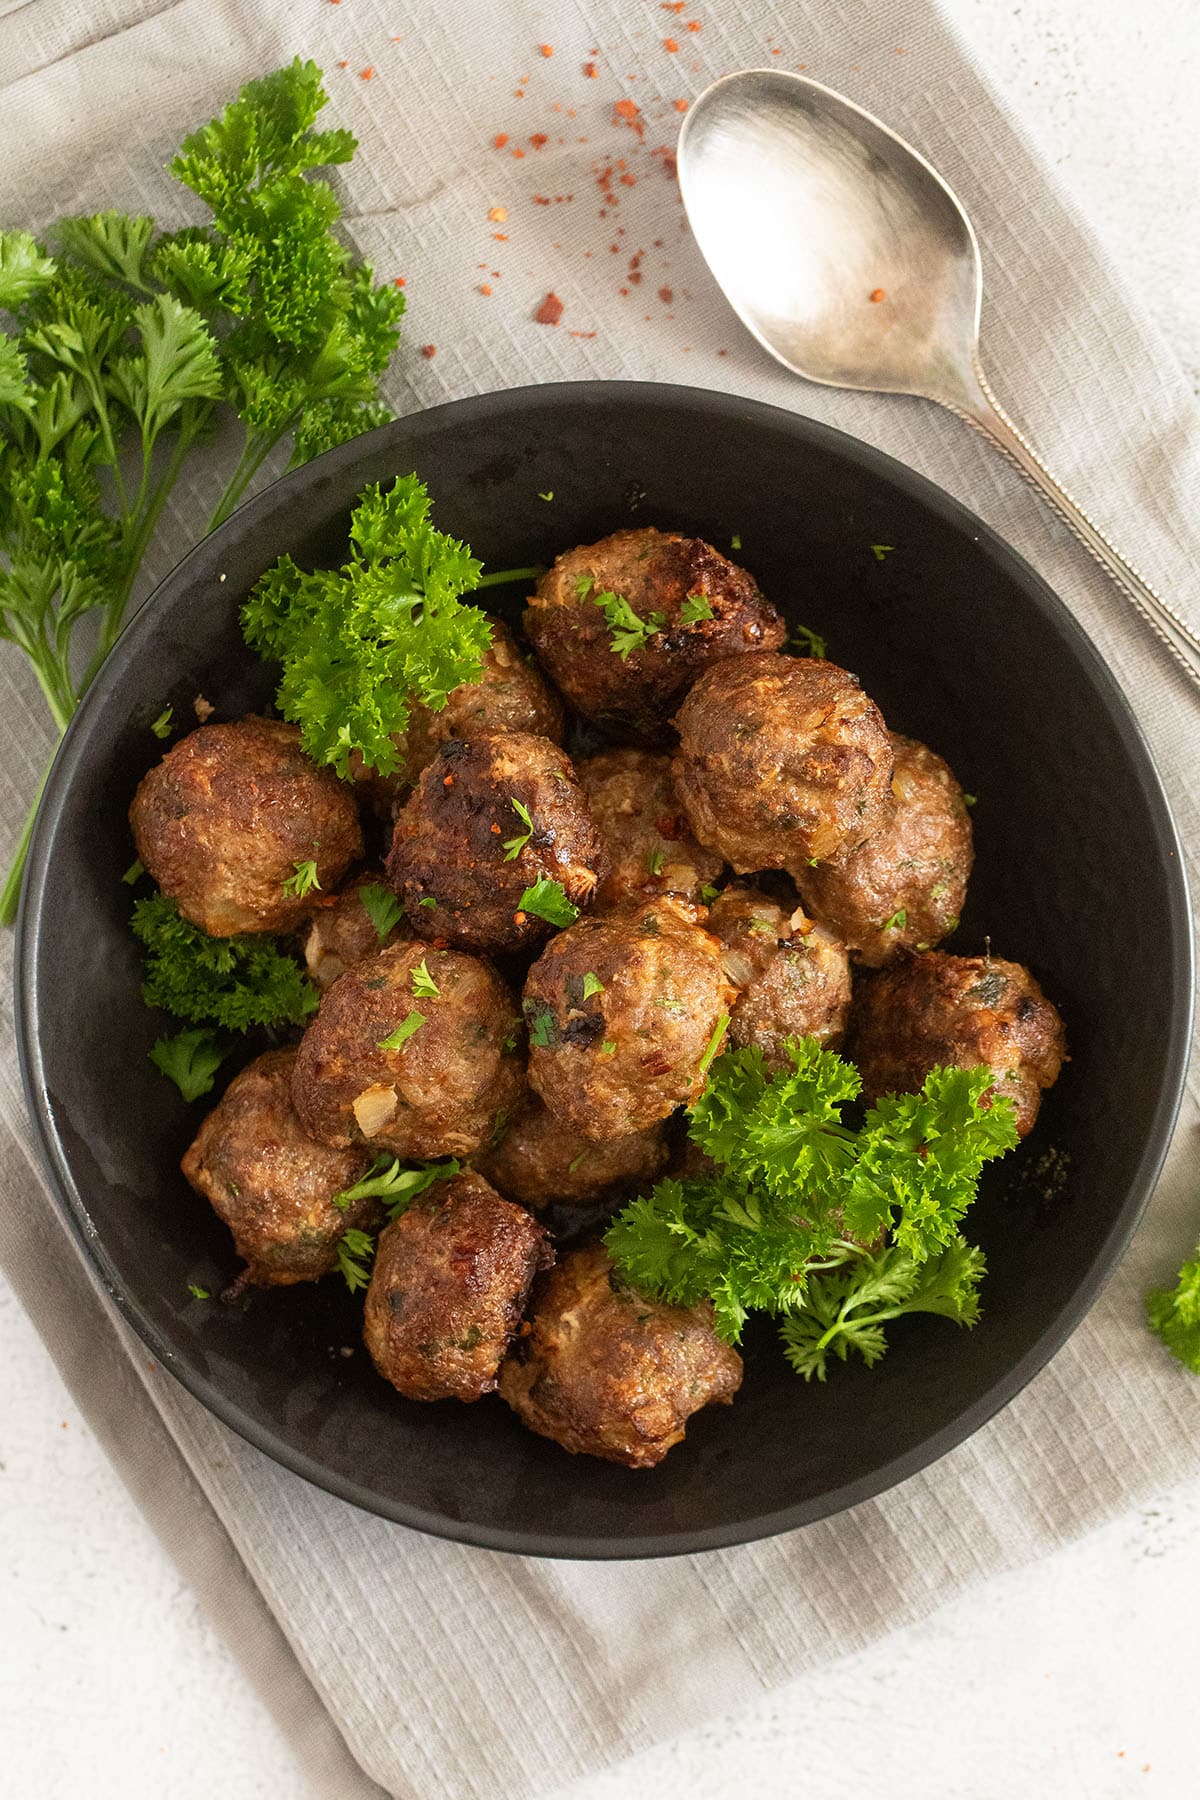 many small meatballs and fresh parsley in a black bowl.